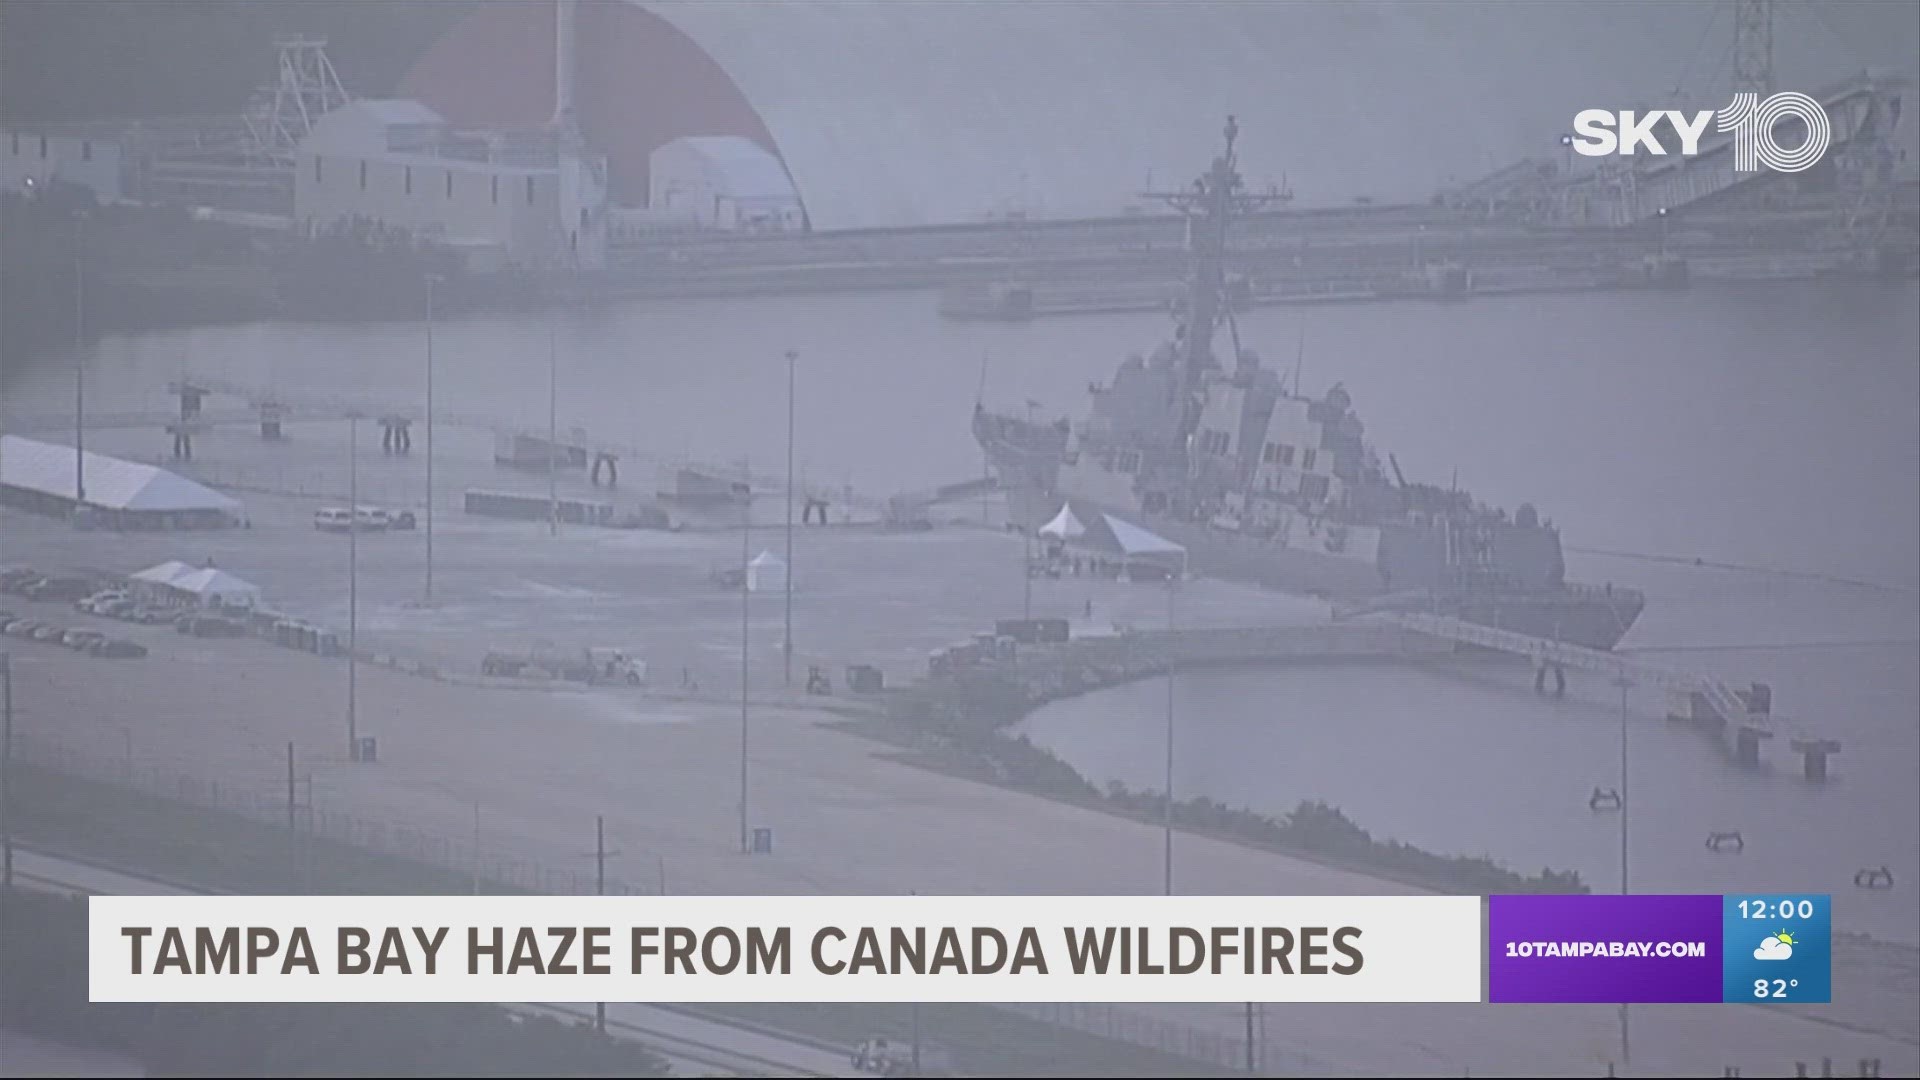 Tampa Bay is covered in a smoky haze caused by wildfires in Canada.